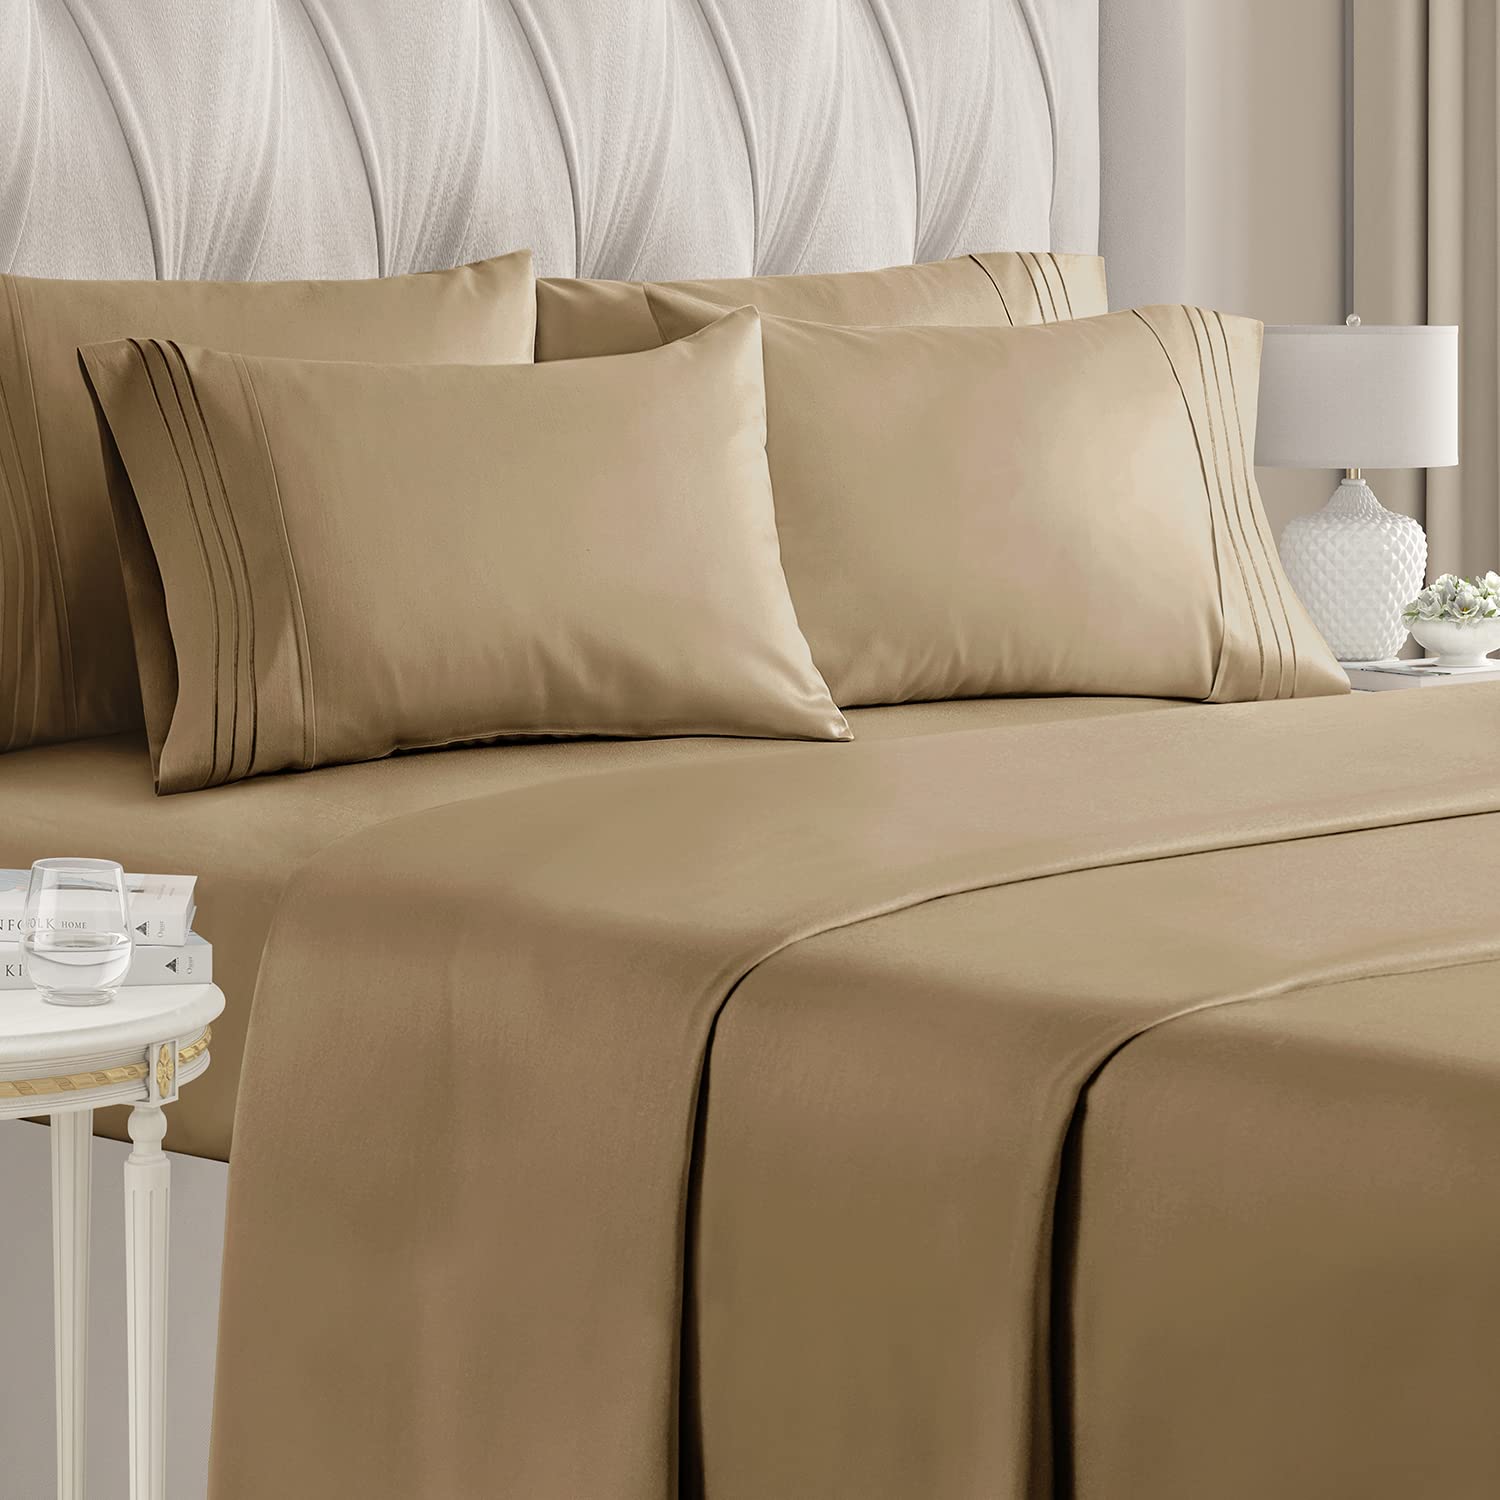 Book Cover California King Size Sheet Set - 6 Piece Set - Hotel Luxury Bed Sheets - Extra Soft - Deep Pockets - Easy Fit - Breathable & Cooling - Wrinkle Free - Comfy - Tan Beige Bed Sheets - Cali Kings Sheets 06 - Beige California King